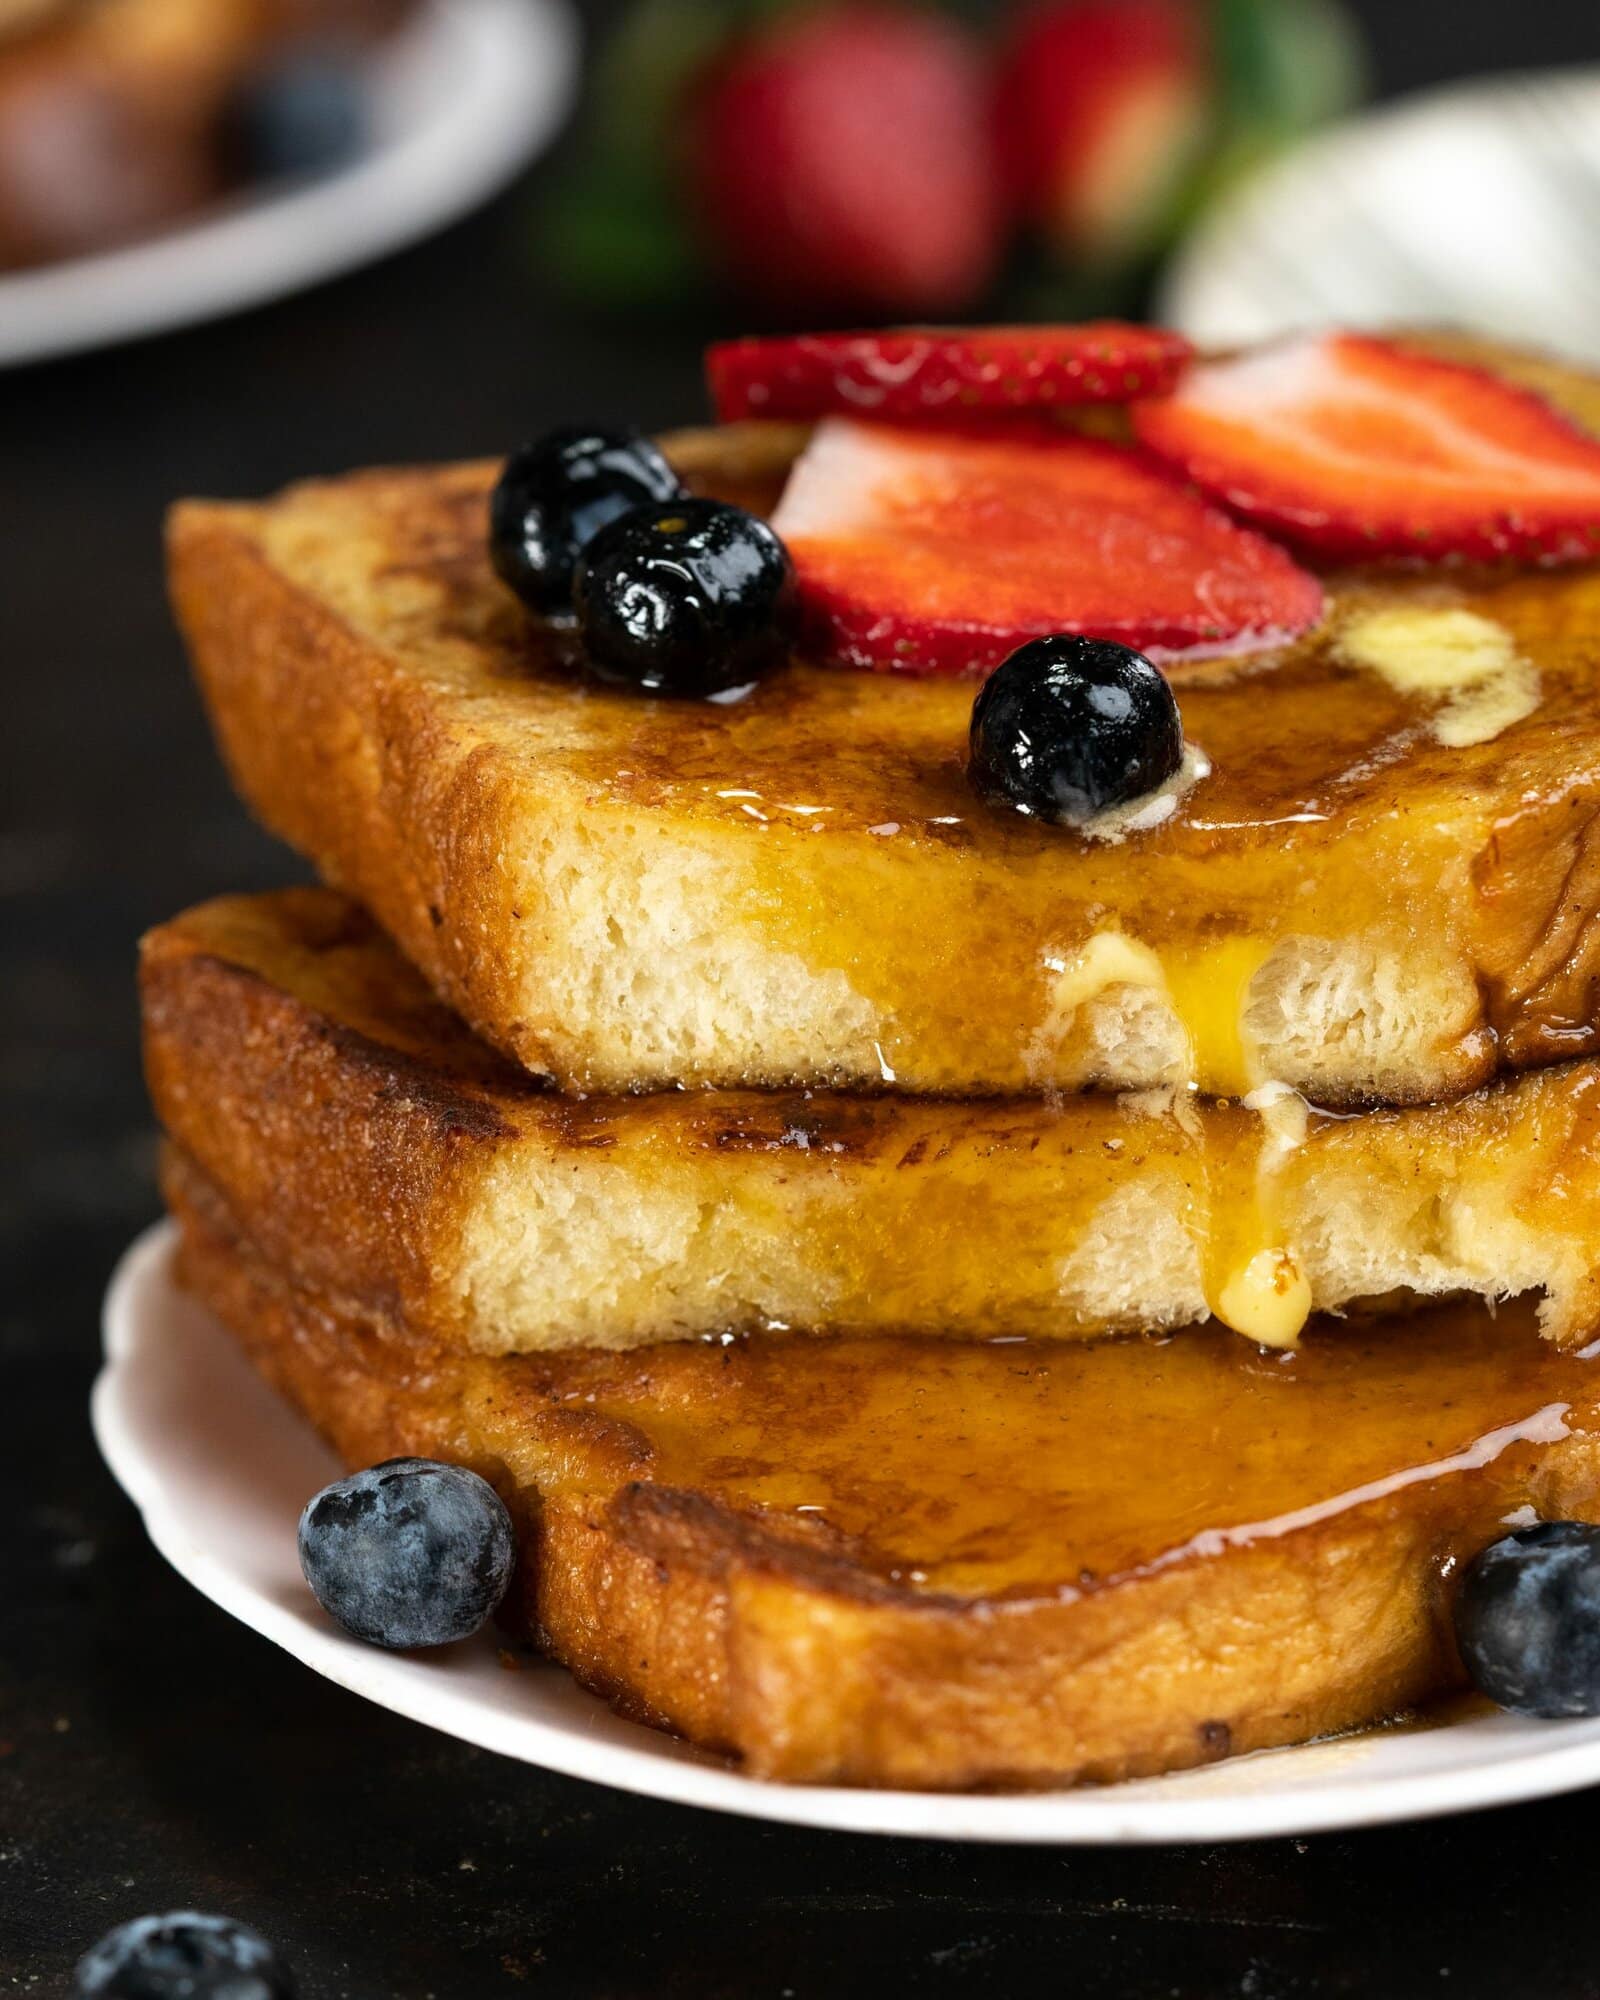 Close up view of toppings of berries and maple syrup dripping down the side of a stack of french toasts.